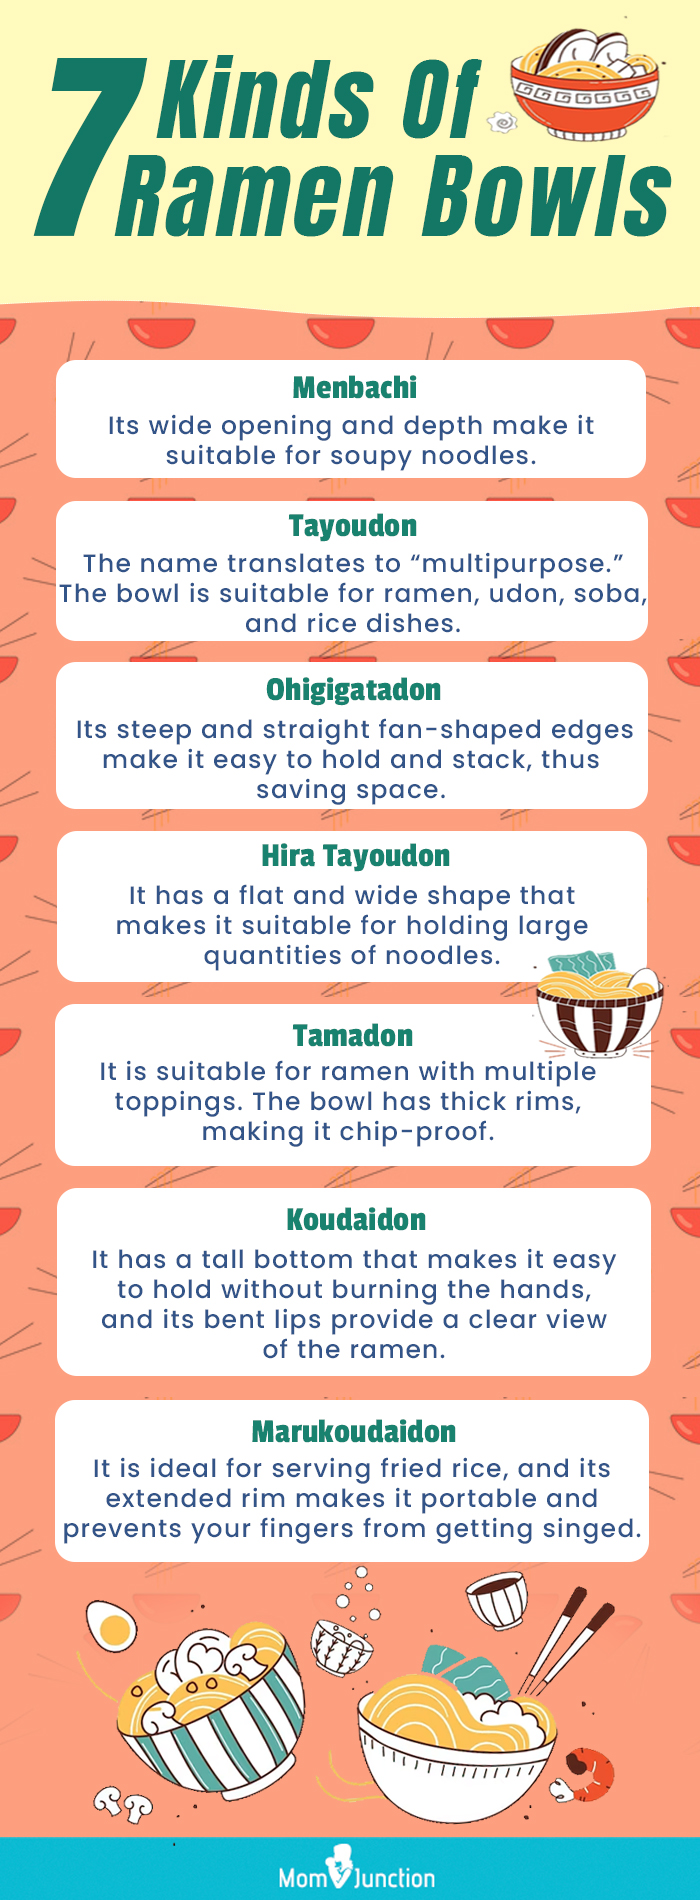 7 Kinds Of Ramen Bowls (infographic)